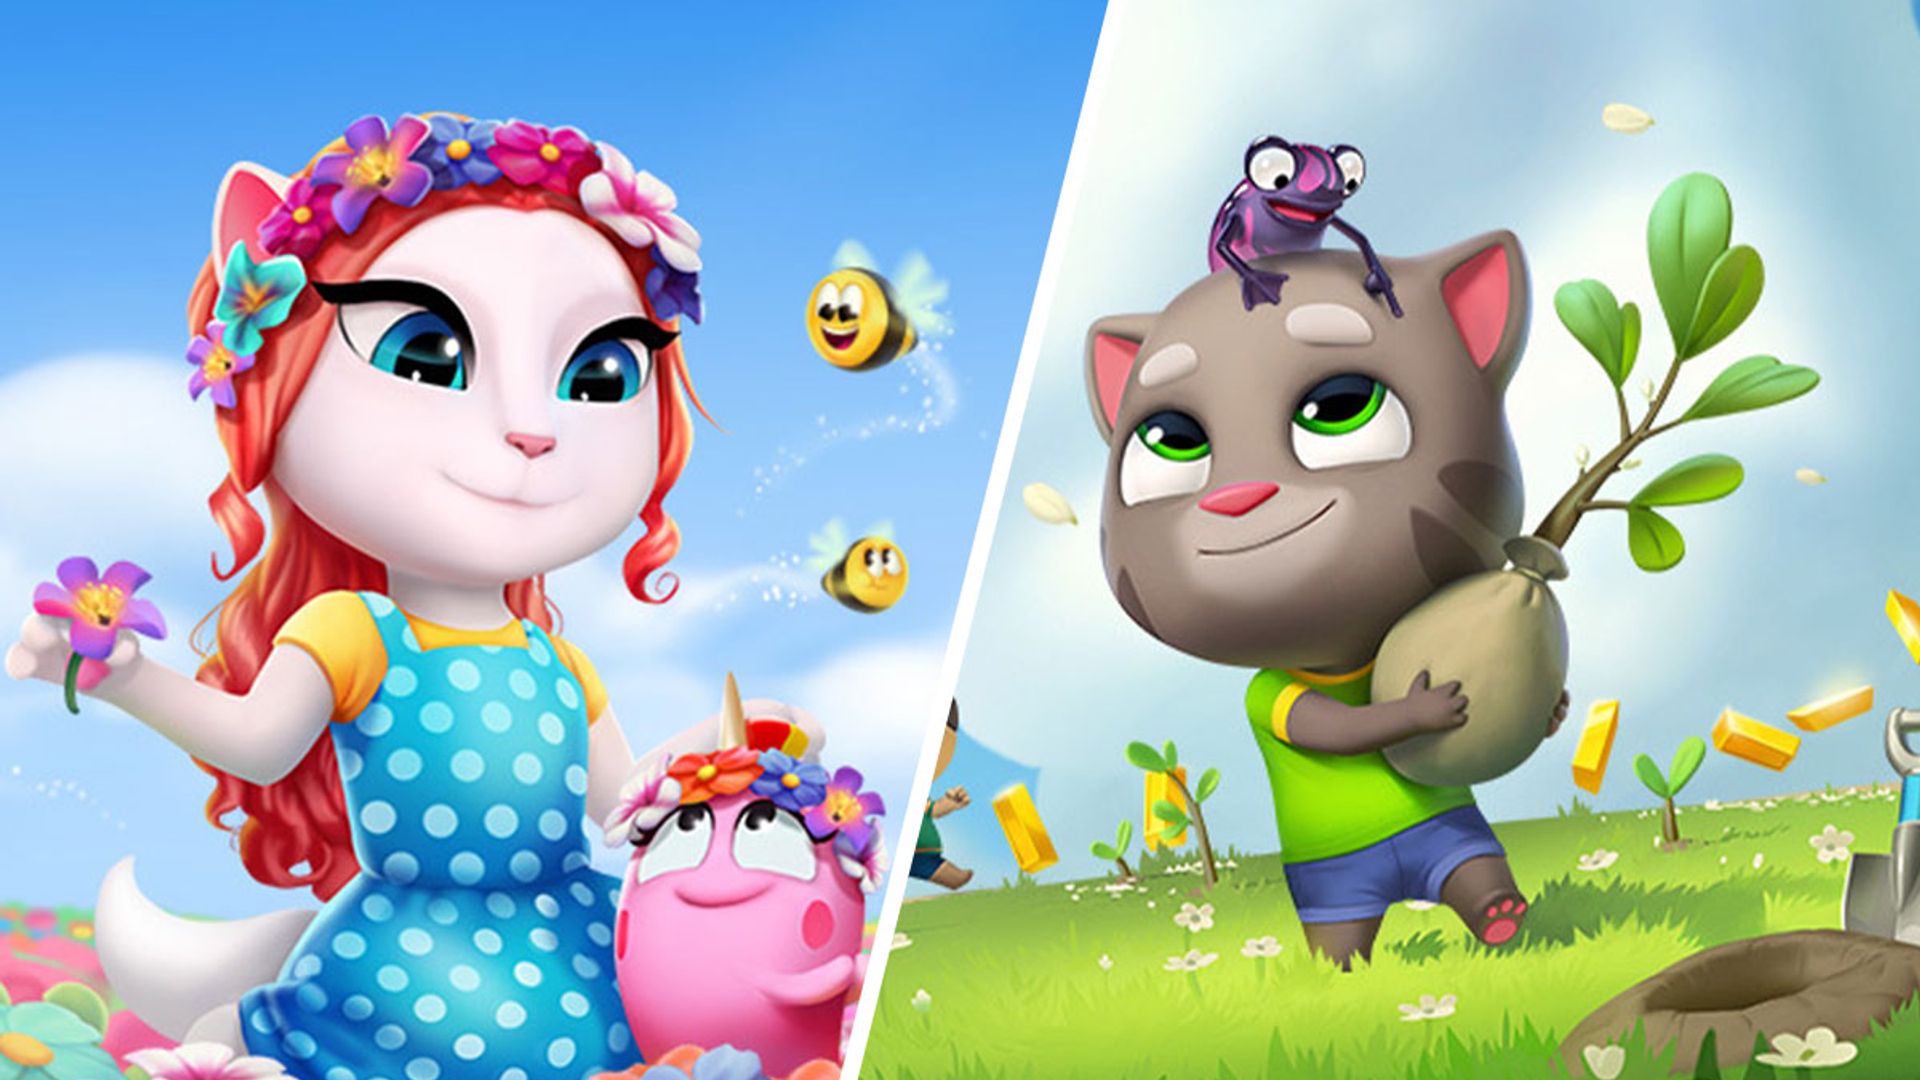 Mobile gamers are obsessed with Talking Tom & Friends – and now players can have fun while saving the environment